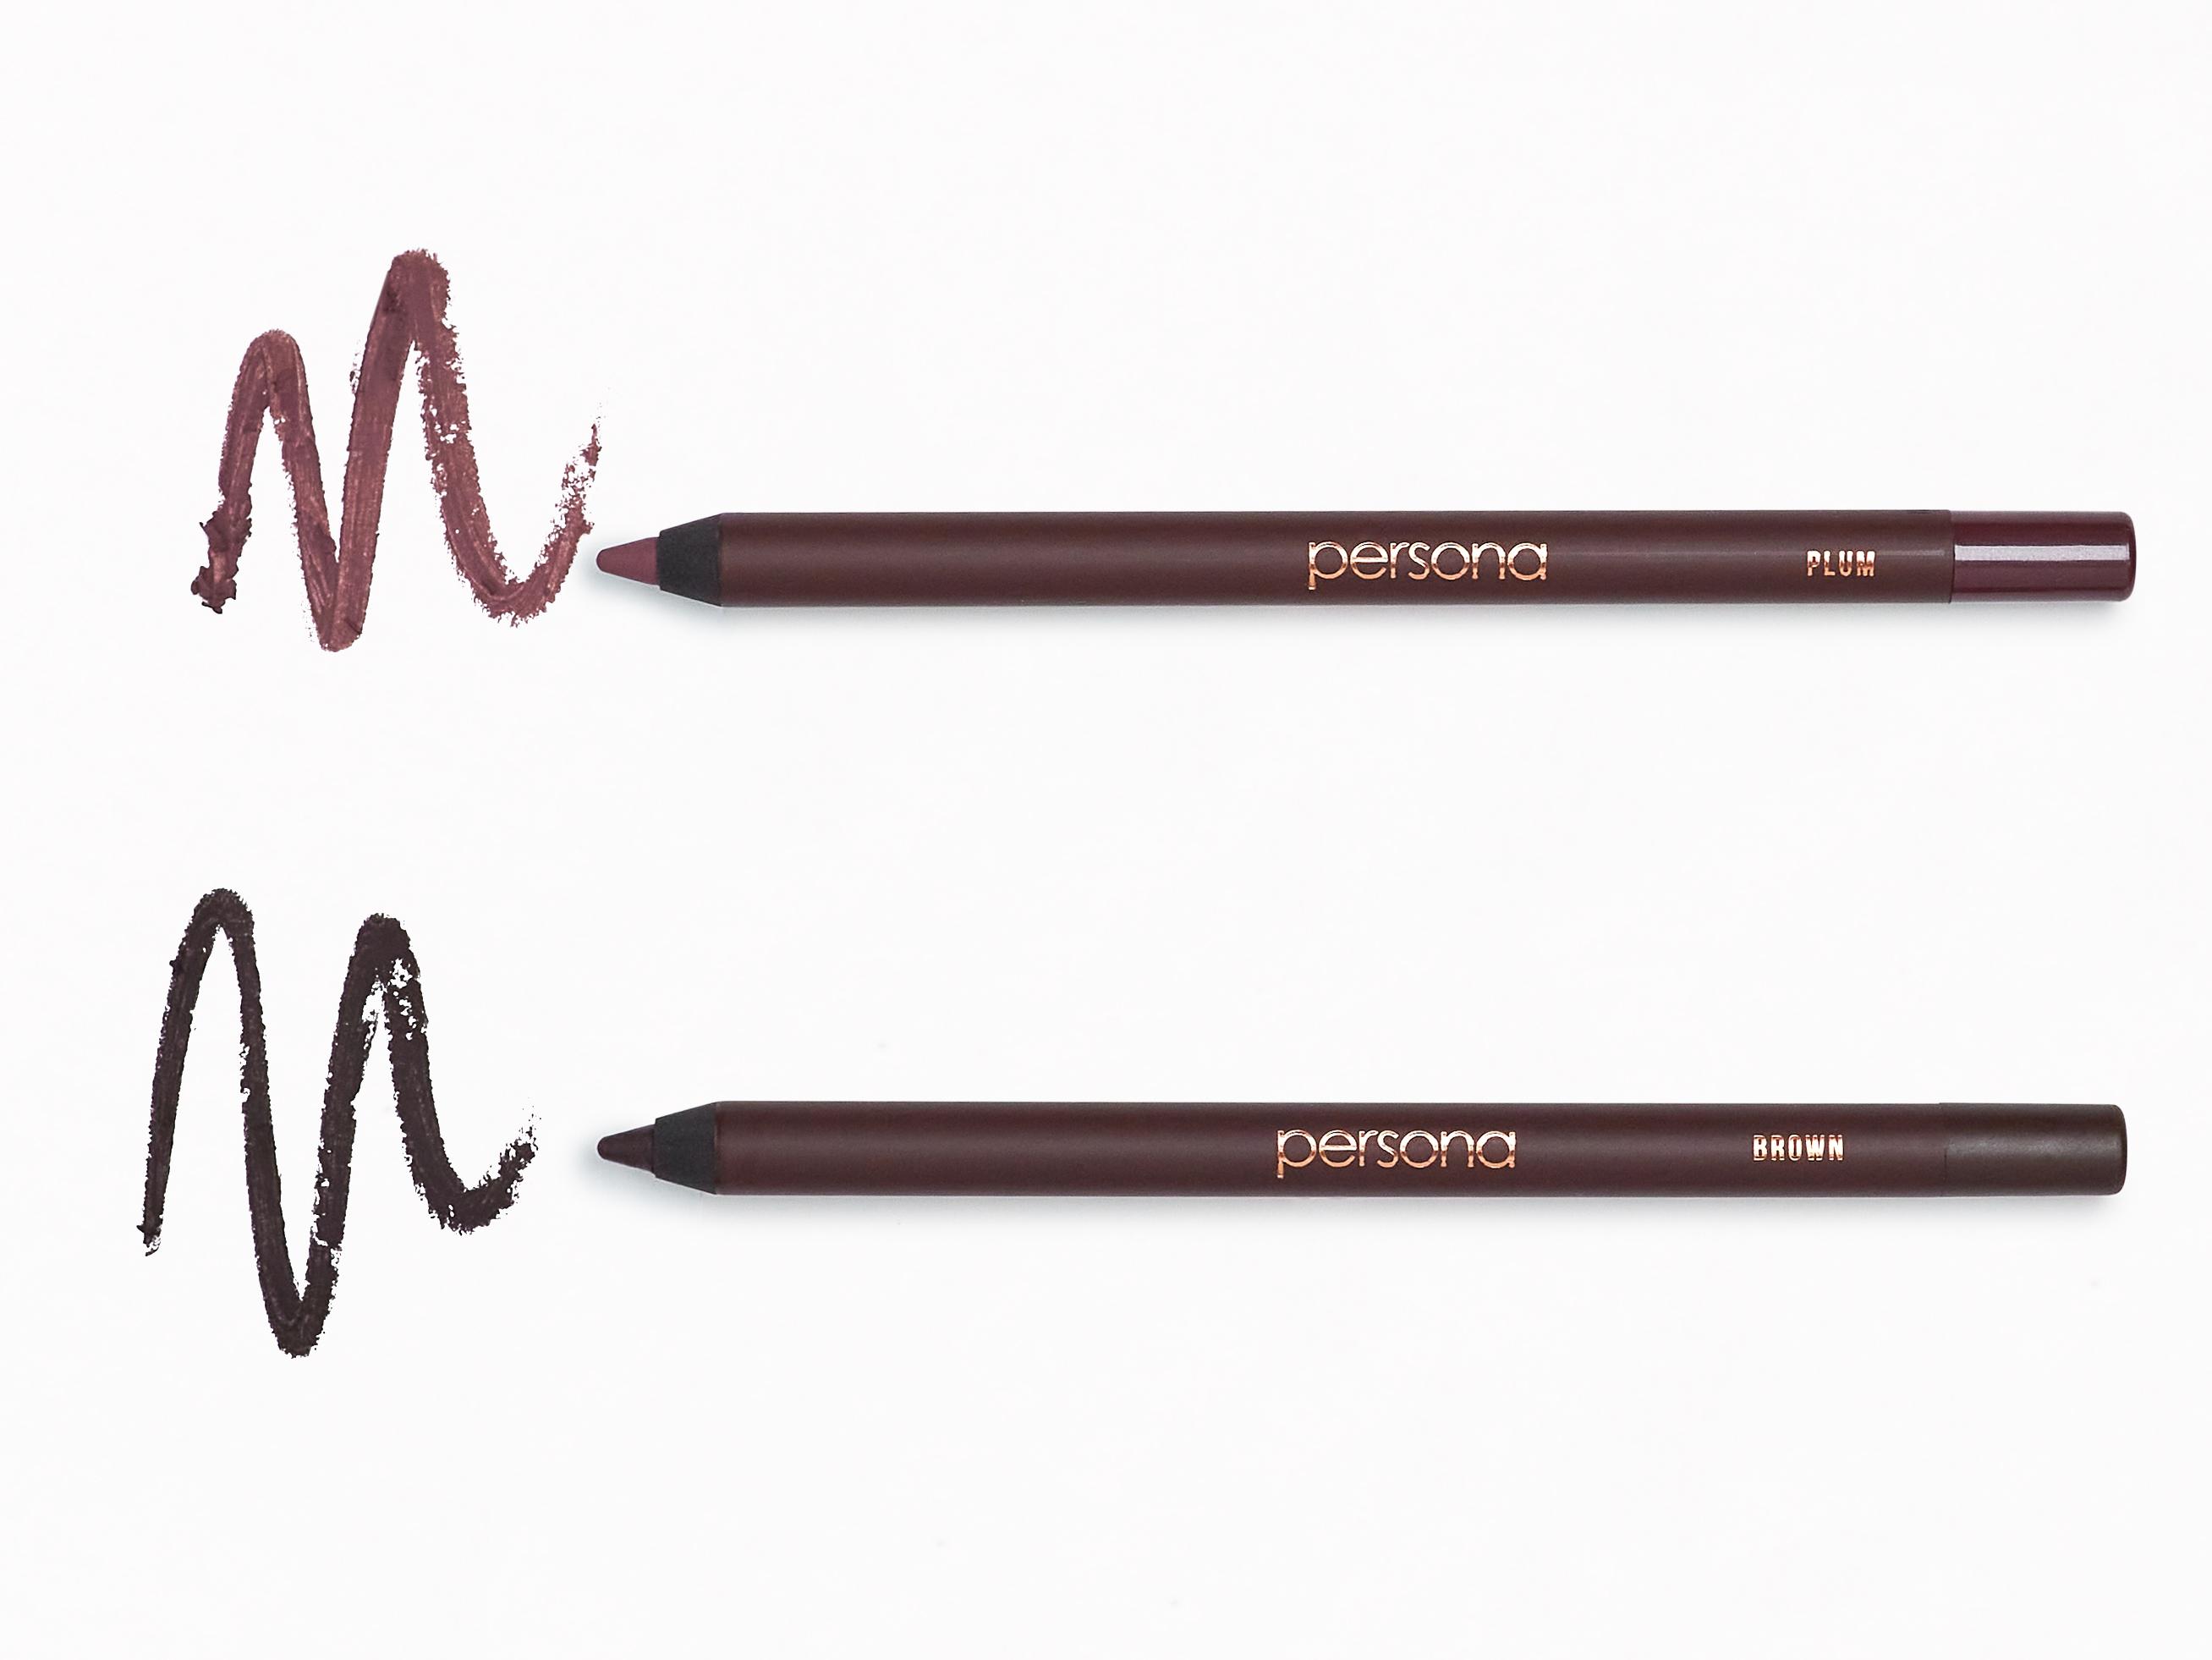 6d2eee1207ee08c5ced1eae7157d253a1869e29f_Persona_Cosmetics_Eyeliner_Duo_2